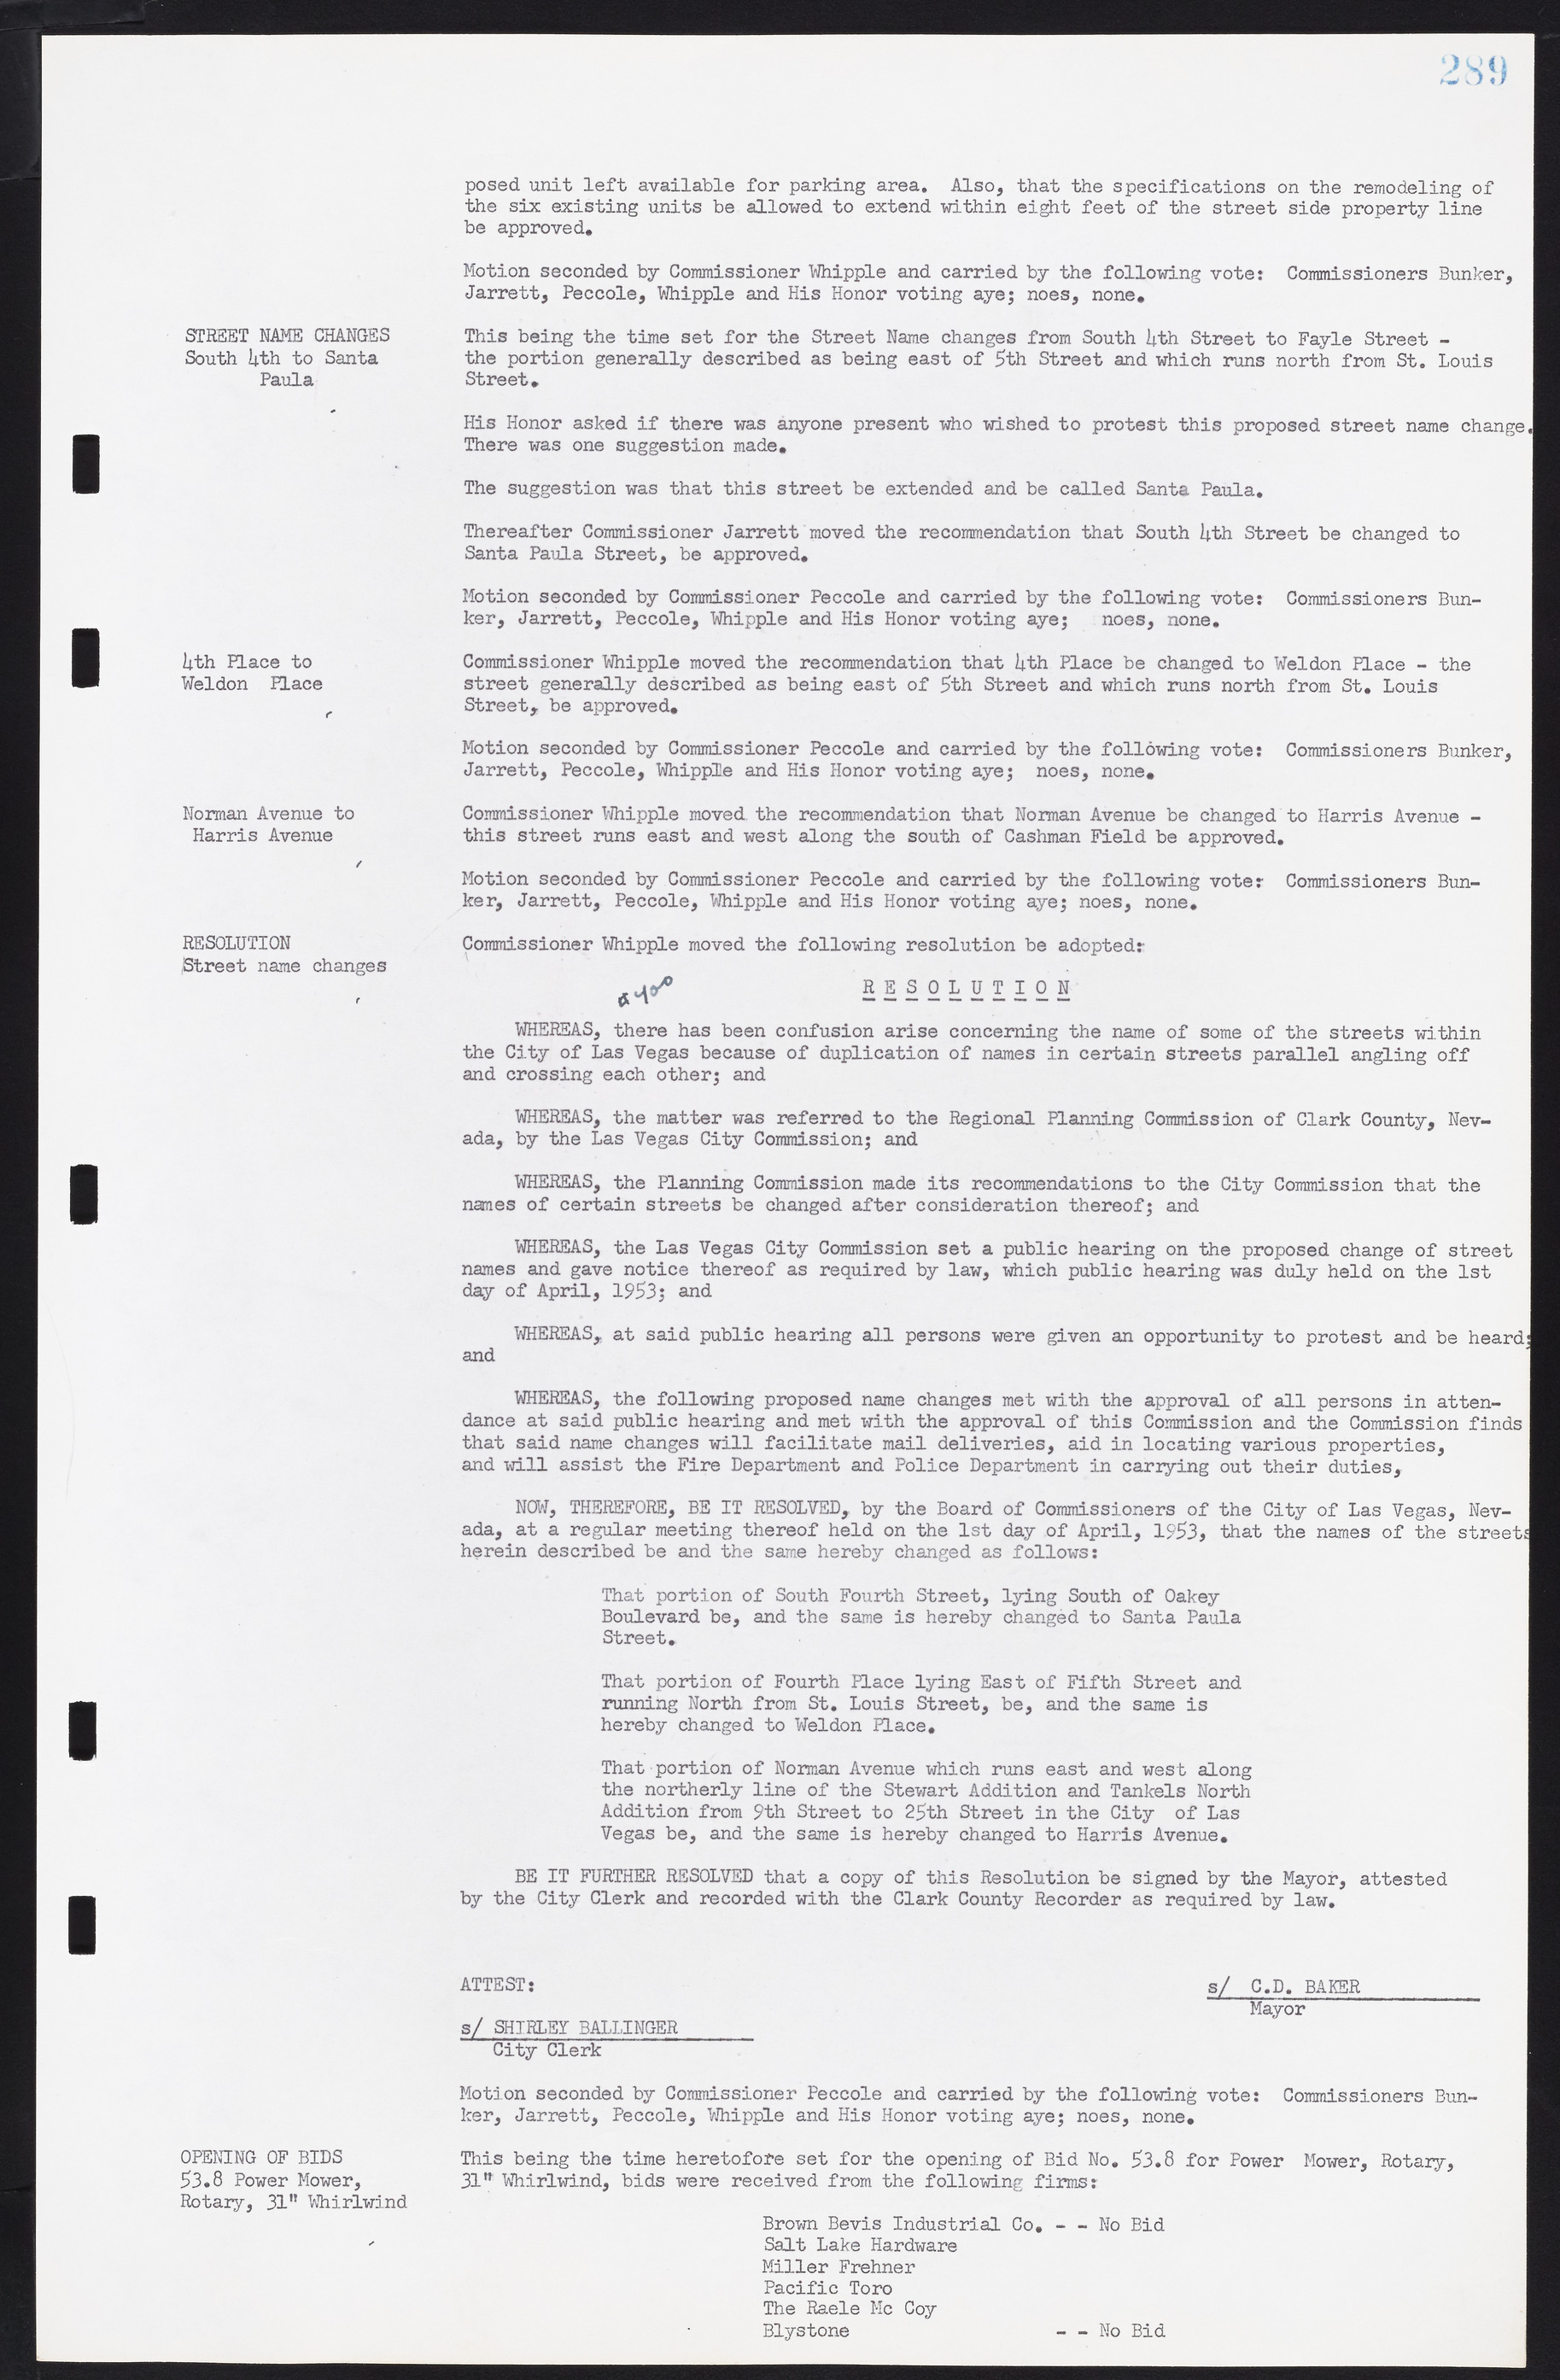 Las Vegas City Commission Minutes, May 26, 1952 to February 17, 1954, lvc000008-317